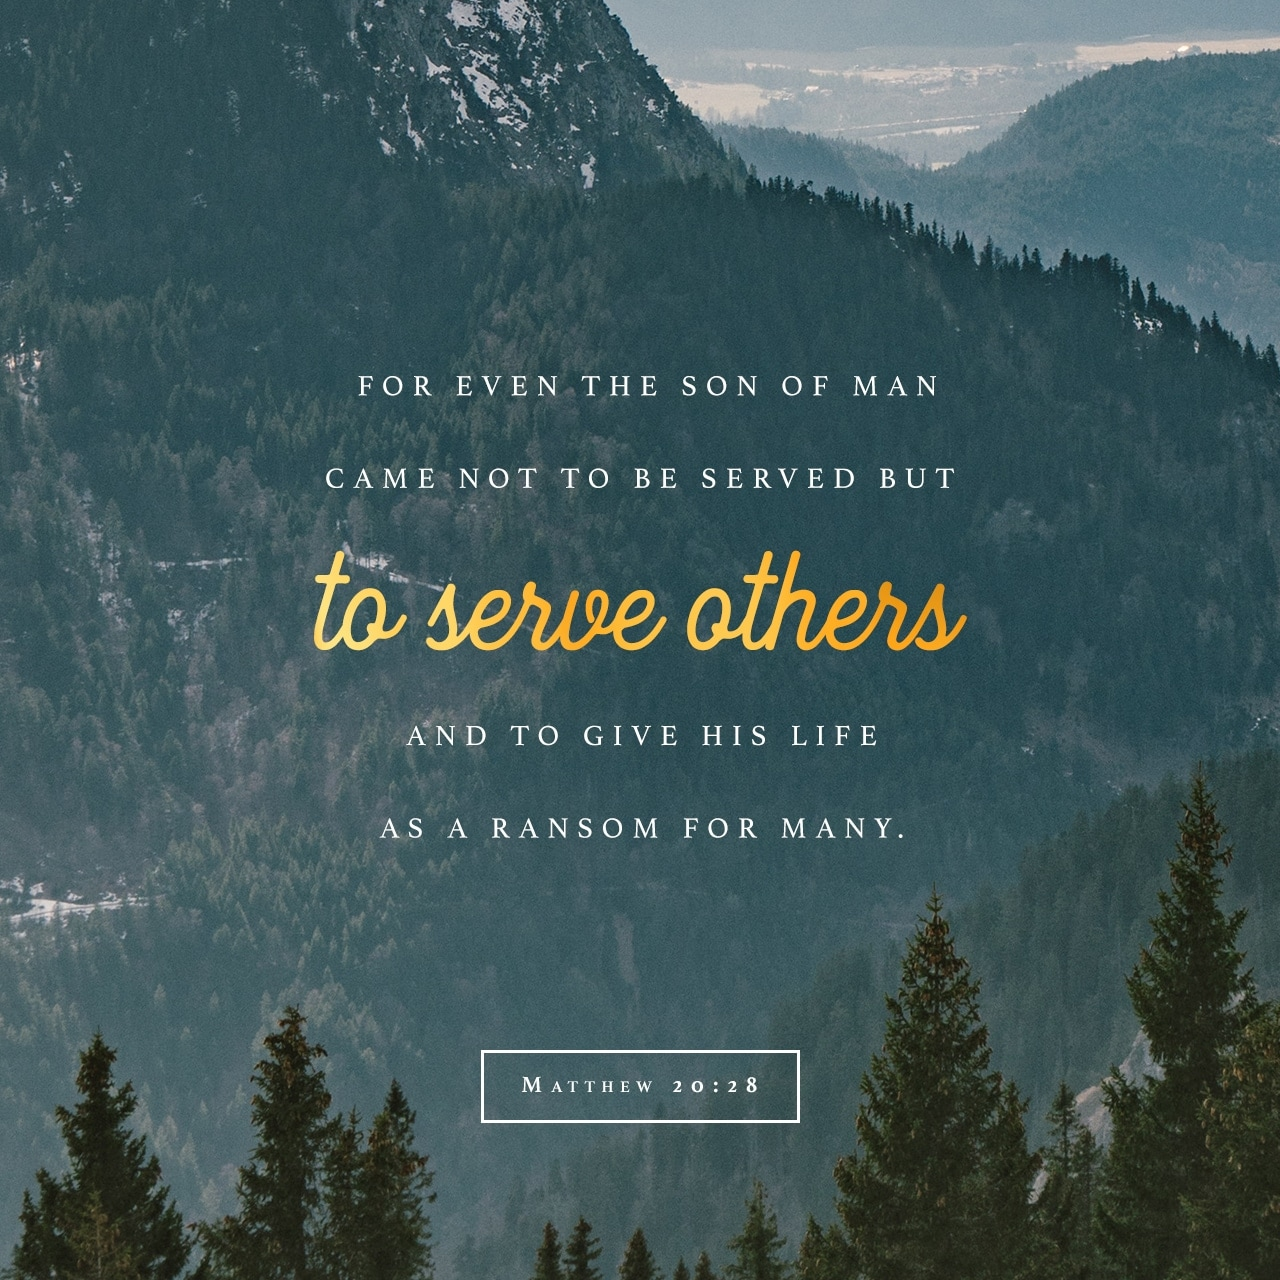 even as the Son of Man came not to be served but to serve, and to give his life as a ransom for many.” Matthew 20:28 ESV https://bible.com/bible/59/mat.20.28.ESV